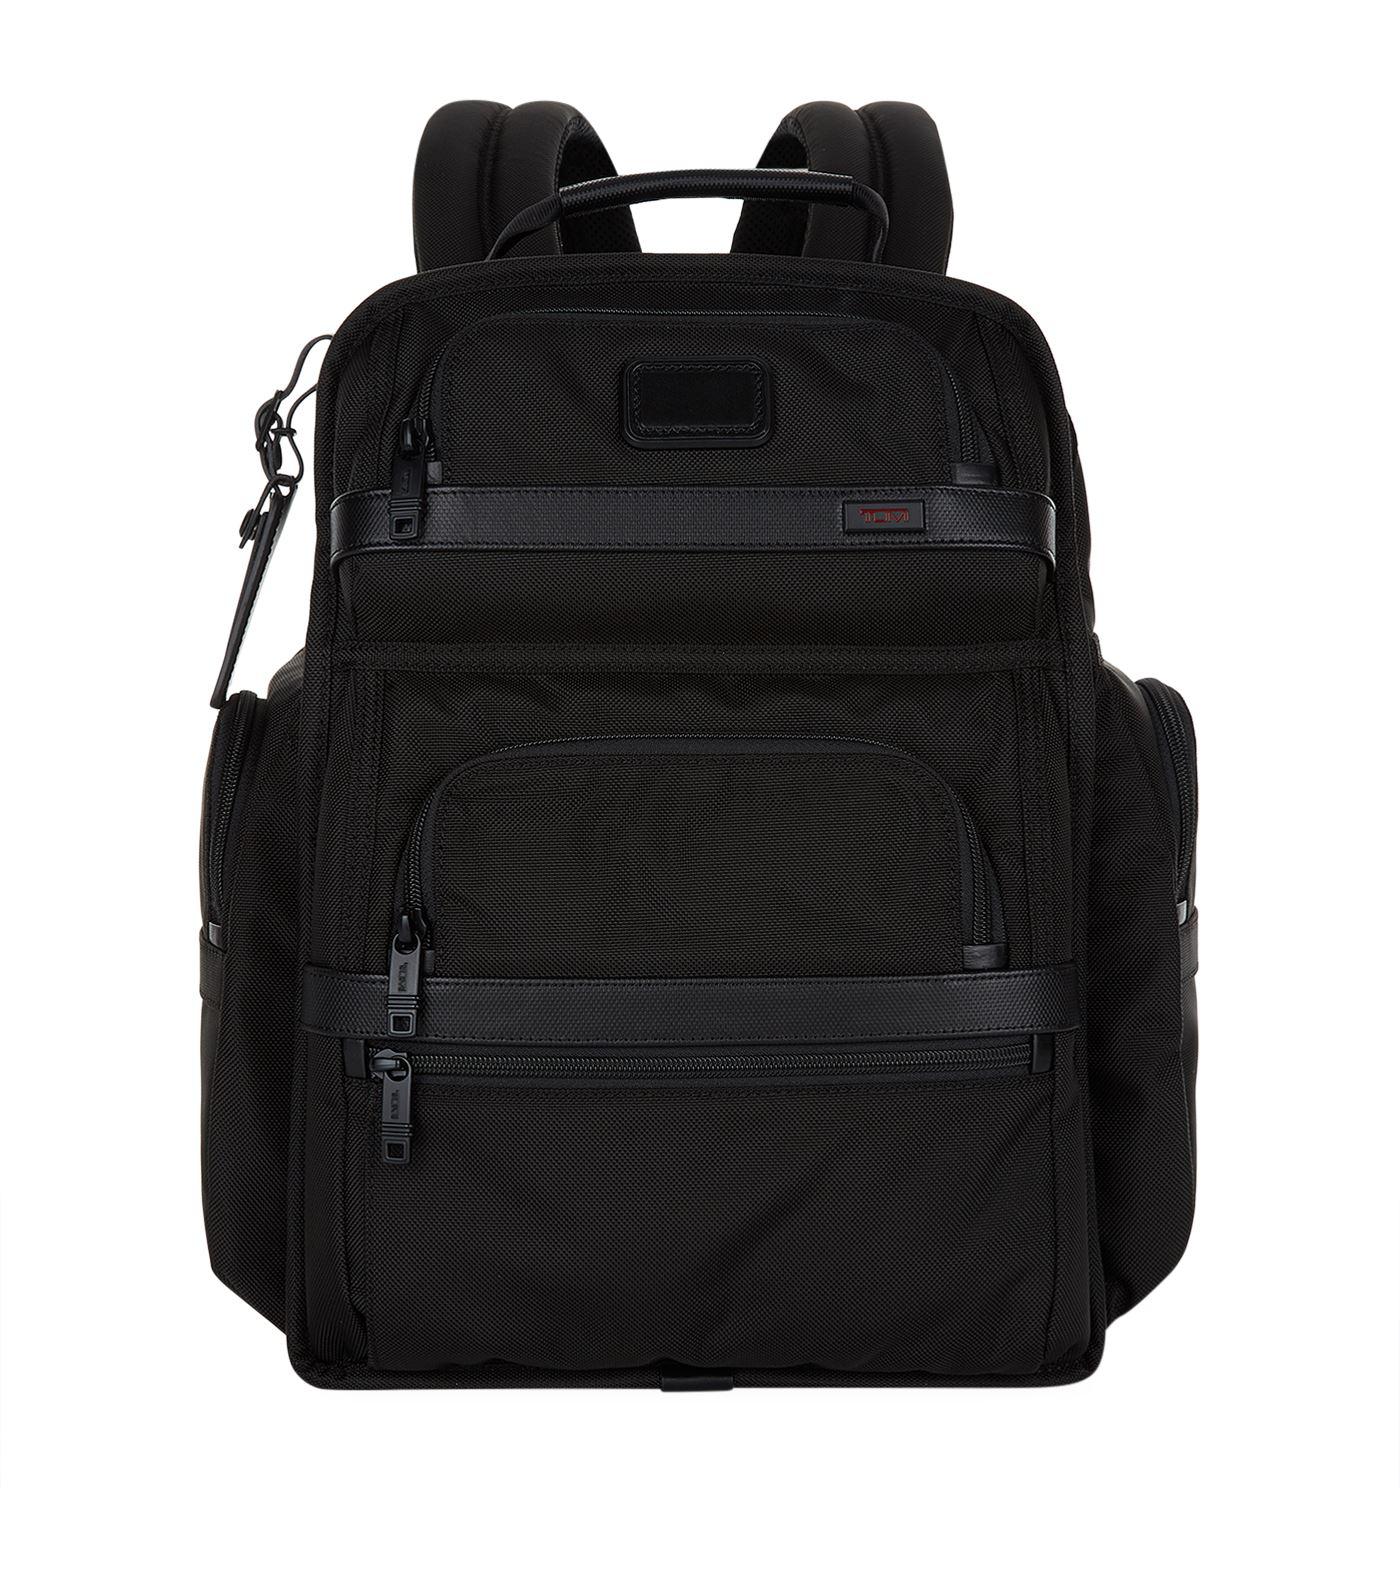 Lyst - Tumi Alpha 2 T-pass Business Backpack in Black for Men